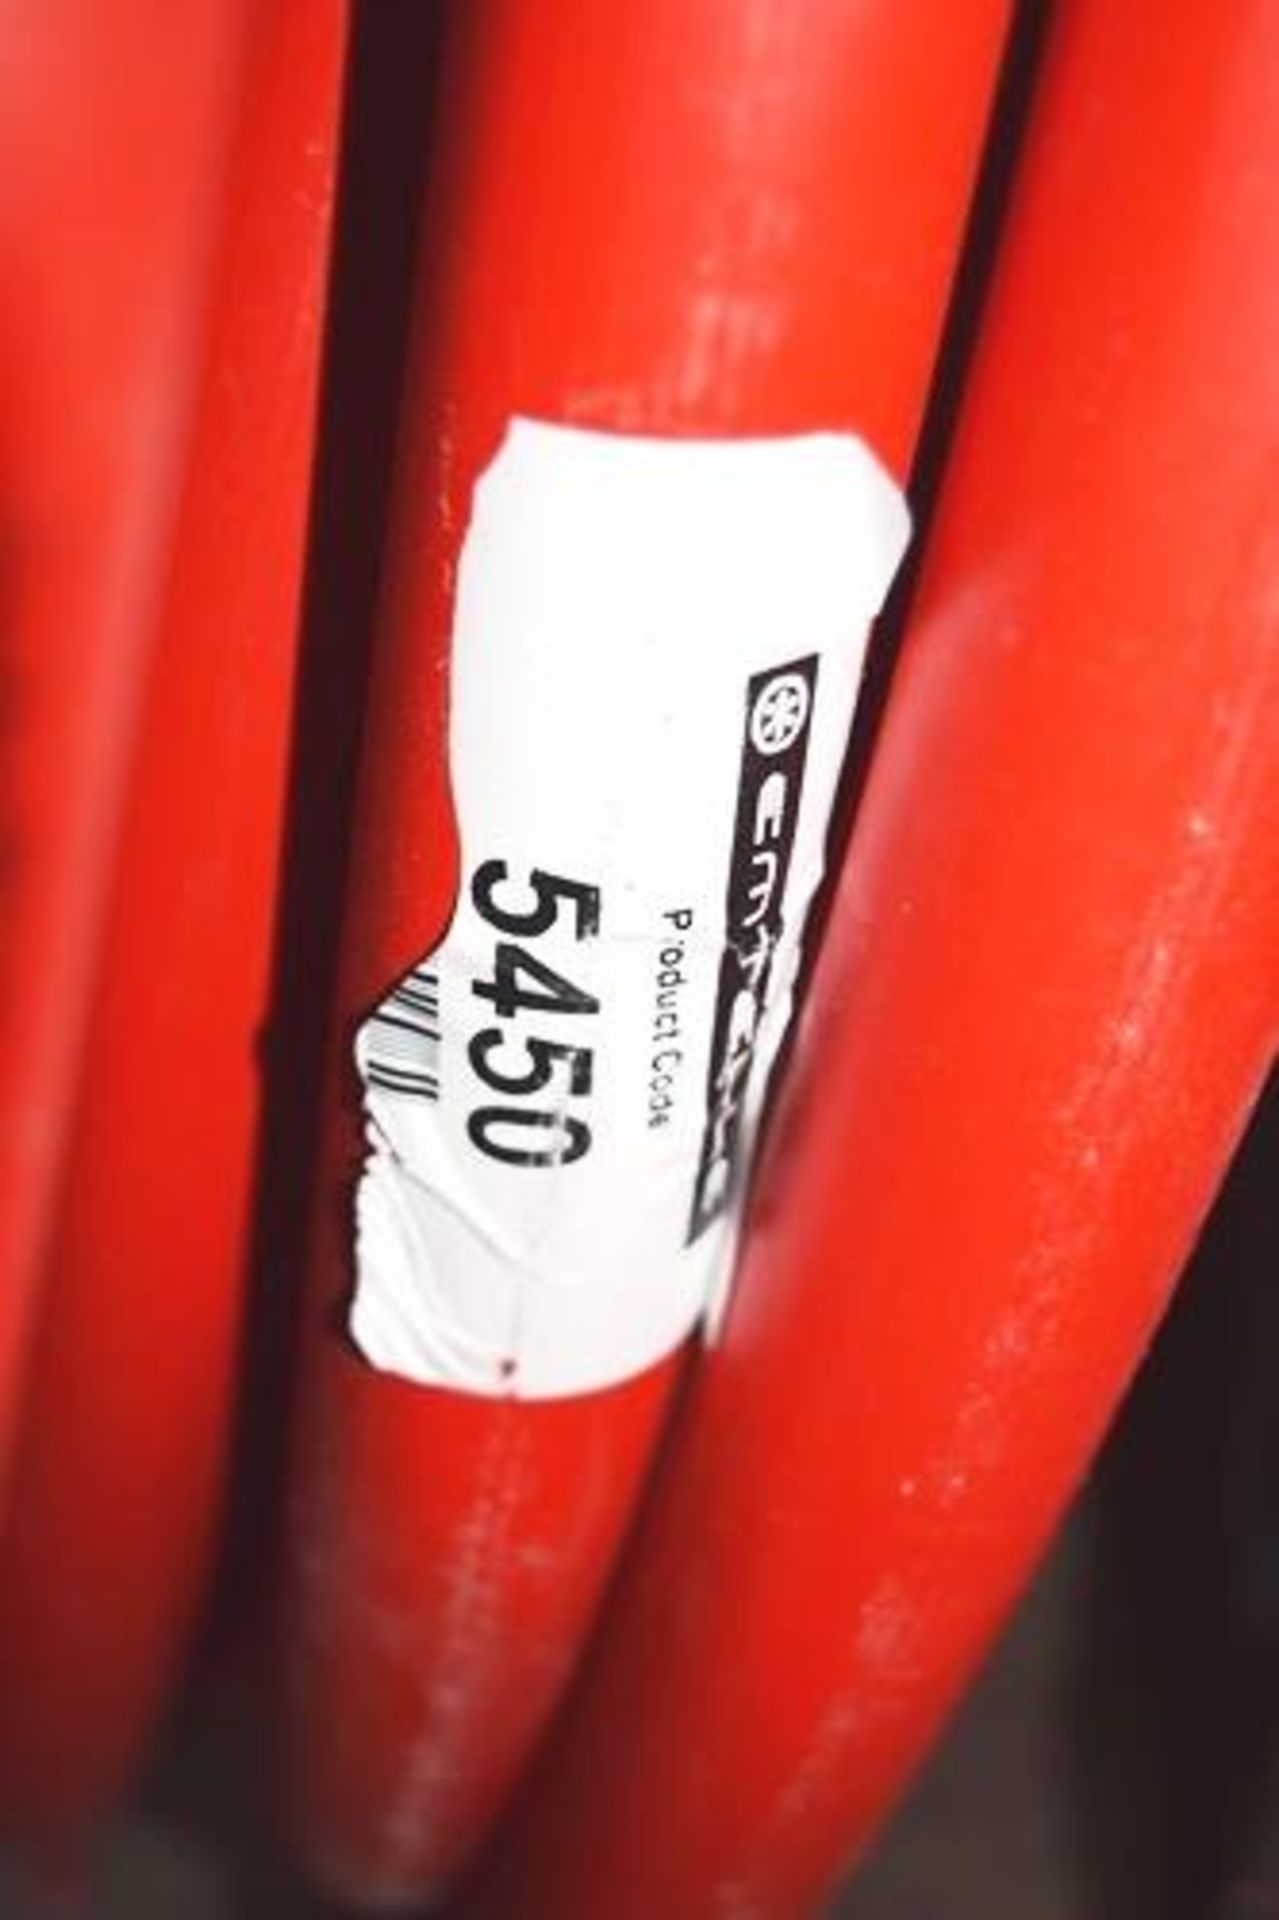 1 x length of red Emtelle 38 32 07, 02, 22 10754m electric cable duct - New (top shed)